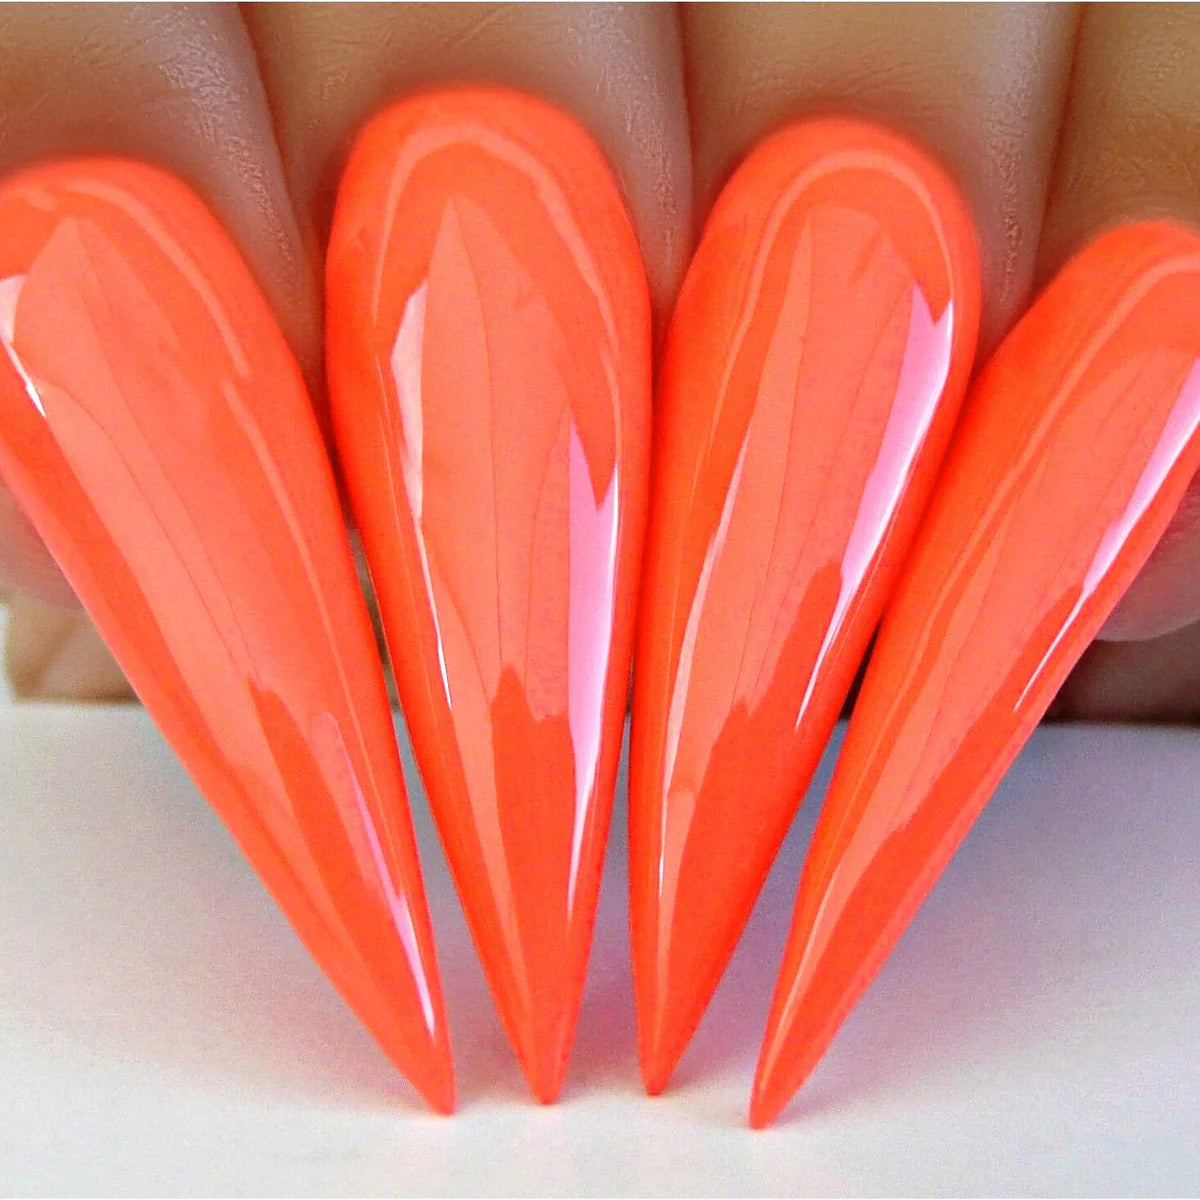 Kiara Sky Gel + Matching Lacquer - Twizzly Tangerine #542 (Clearance) - Universal Nail Supplies